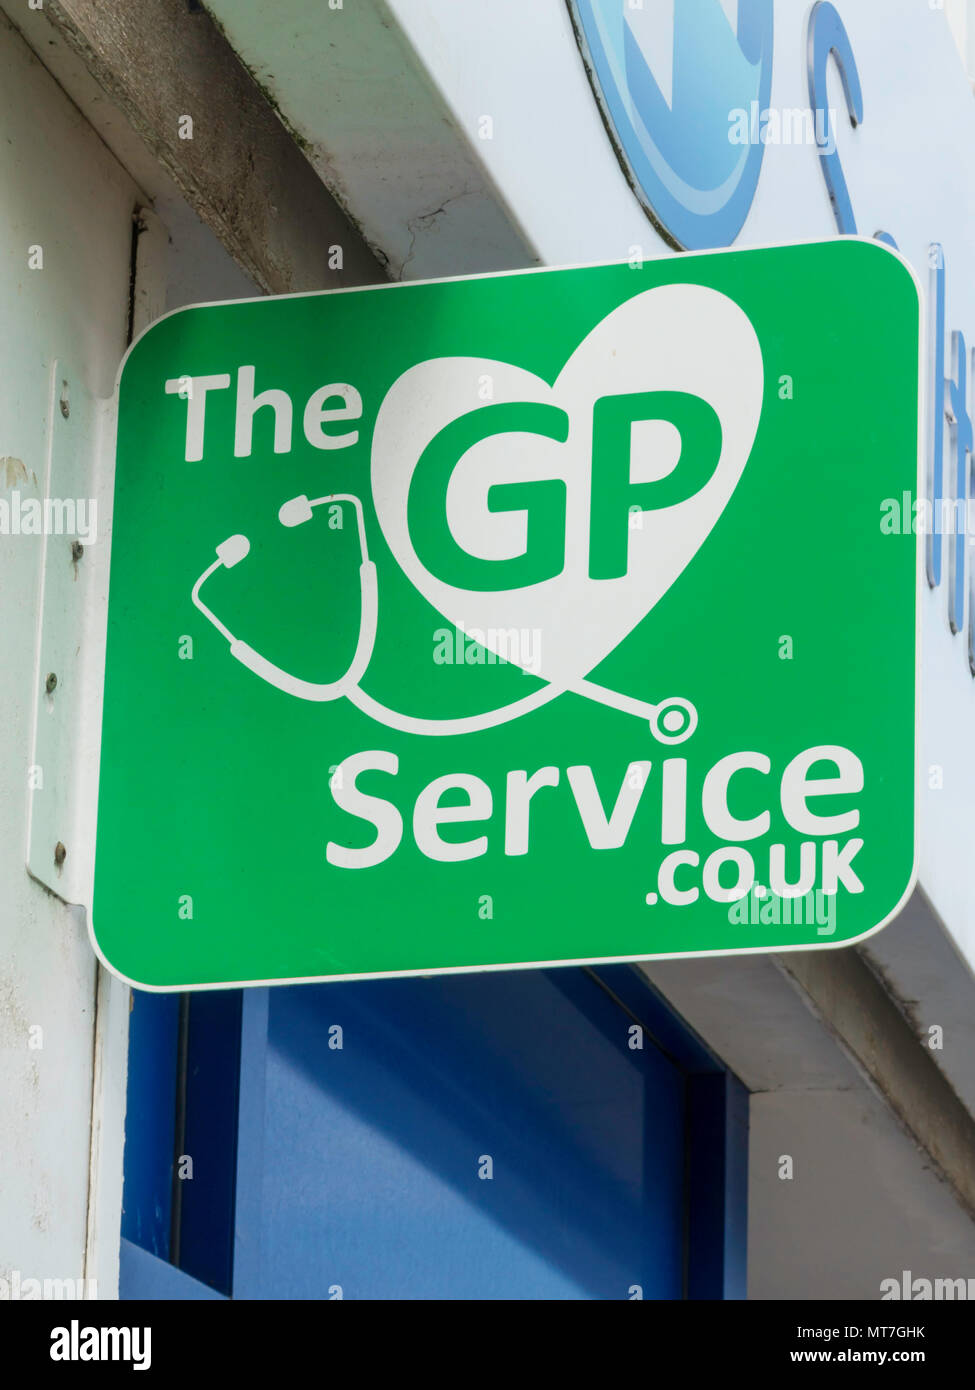 A Green sign on a High Street Pharmacy showing The GP service.co.uk Stock Photo